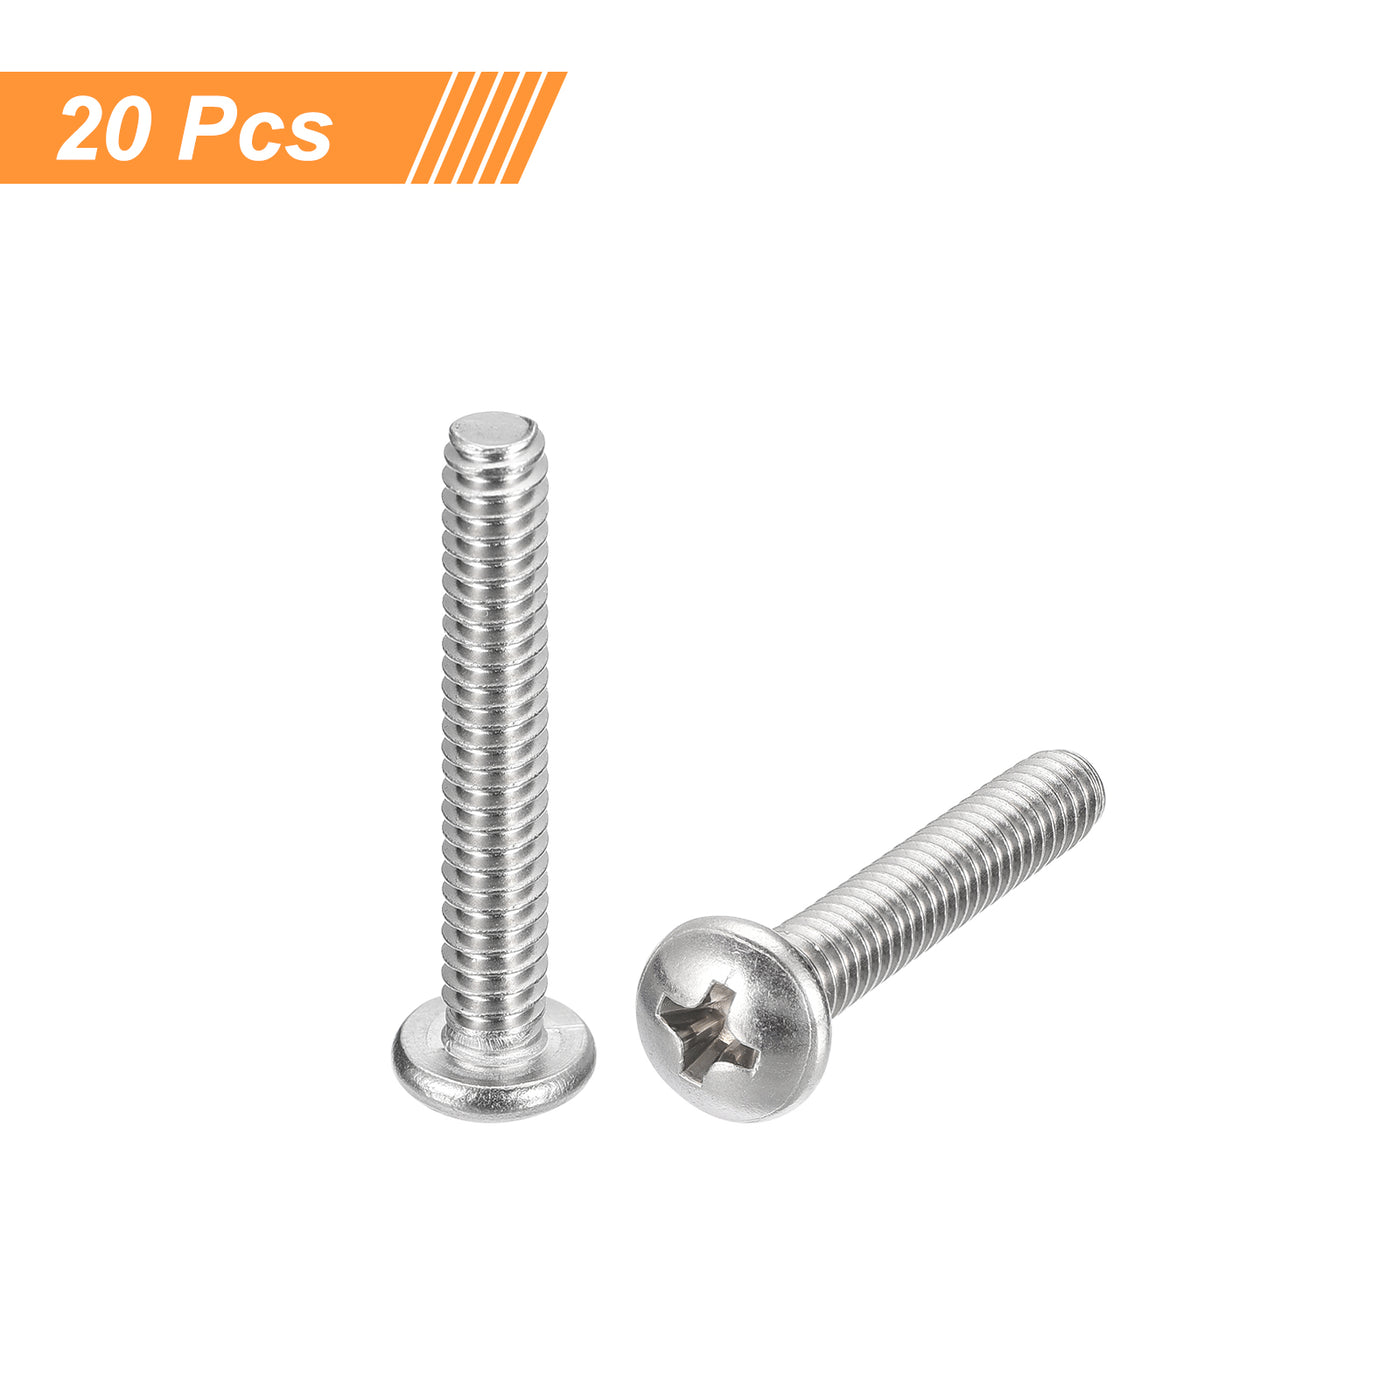 uxcell Uxcell #10-24x1-1/4" Pan Head Machine Screws, Stainless Steel 18-8 Screw, Pack of 20